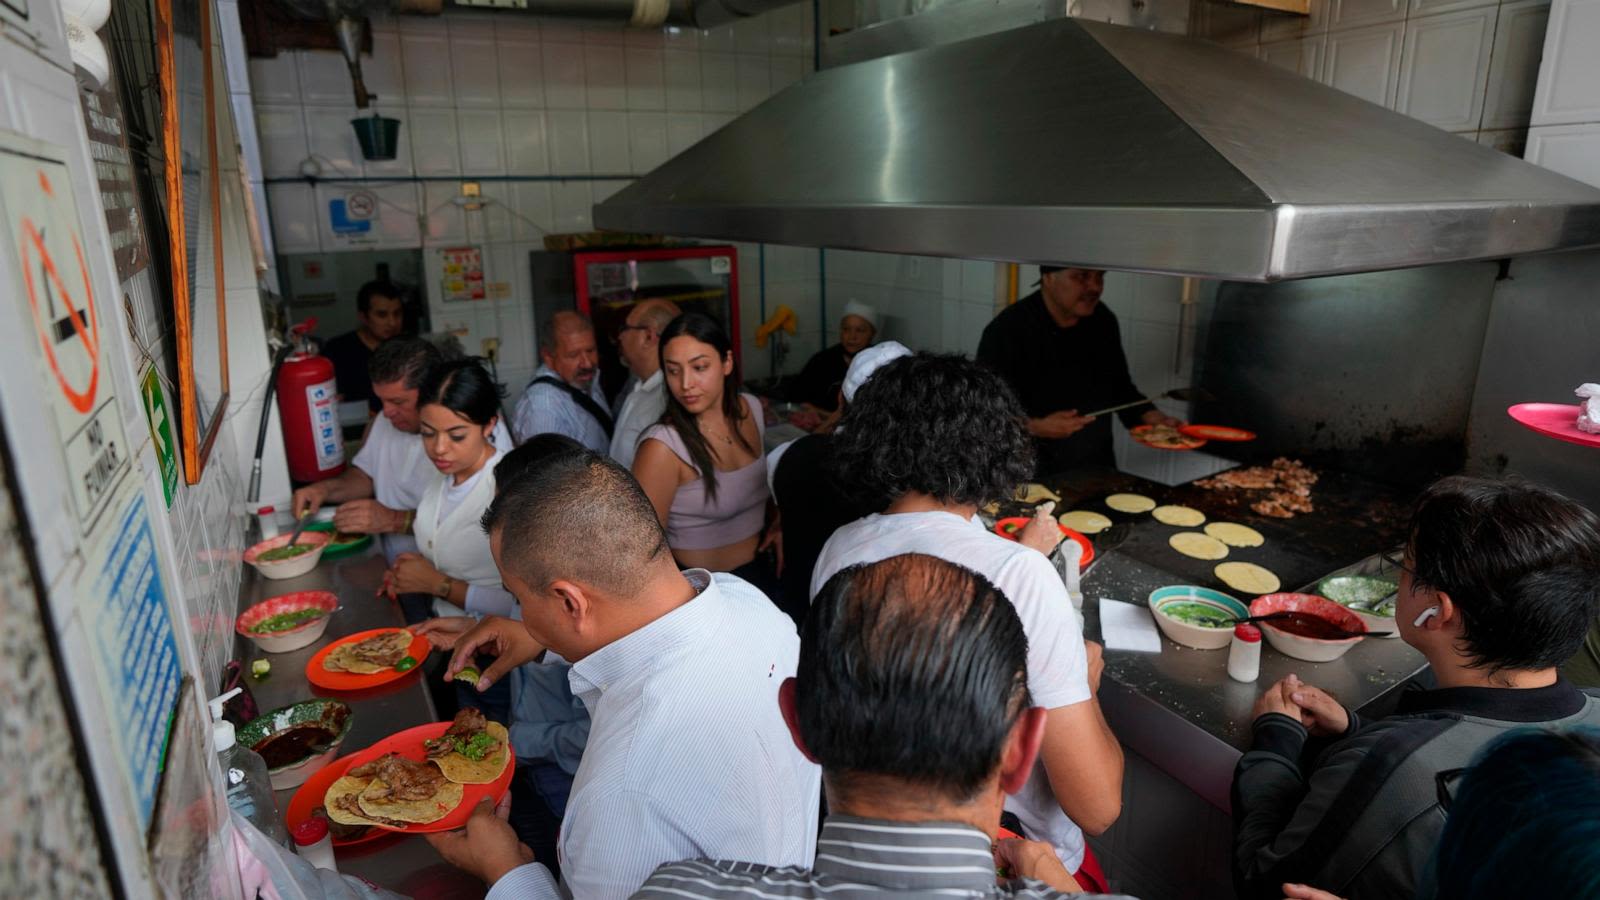 Mexico City taco stand makes history as 1st to earn Michelin star